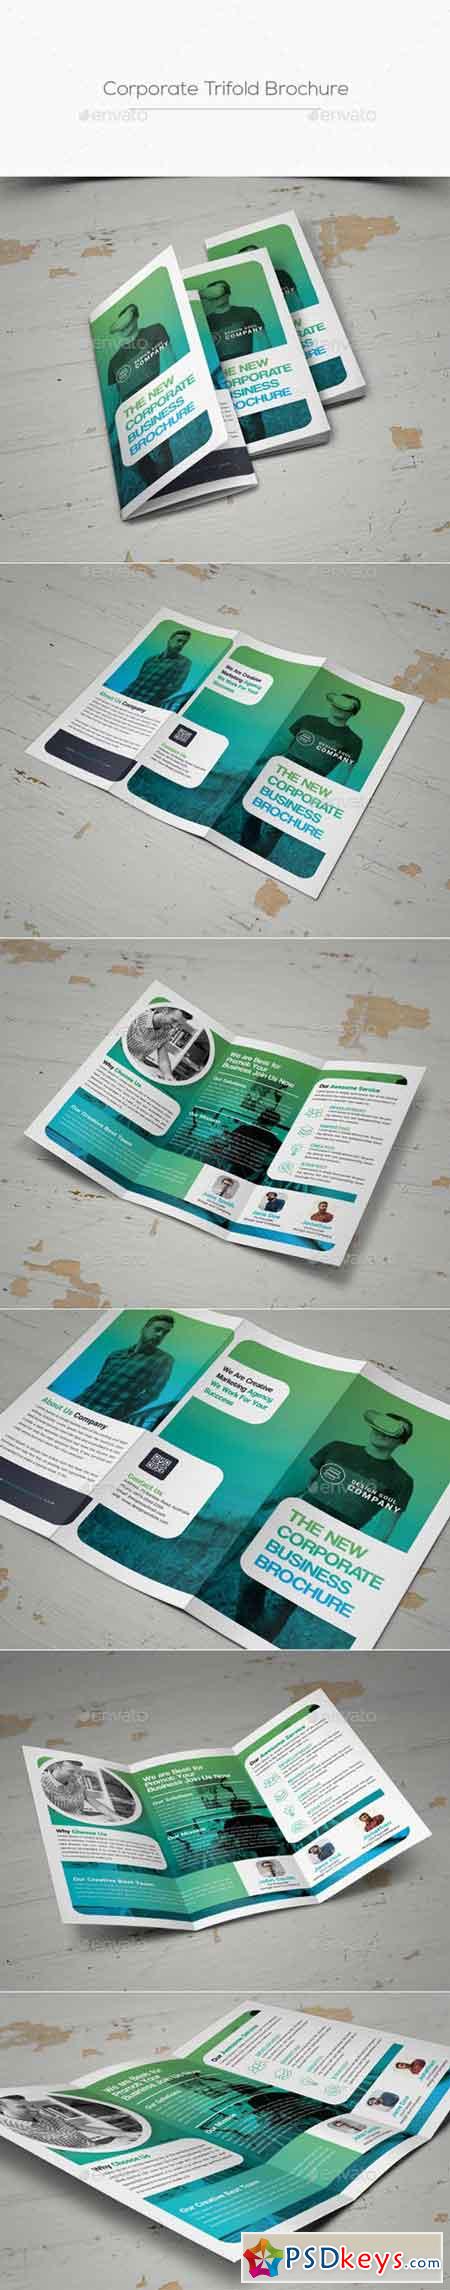 Trifold Brochure 20175694